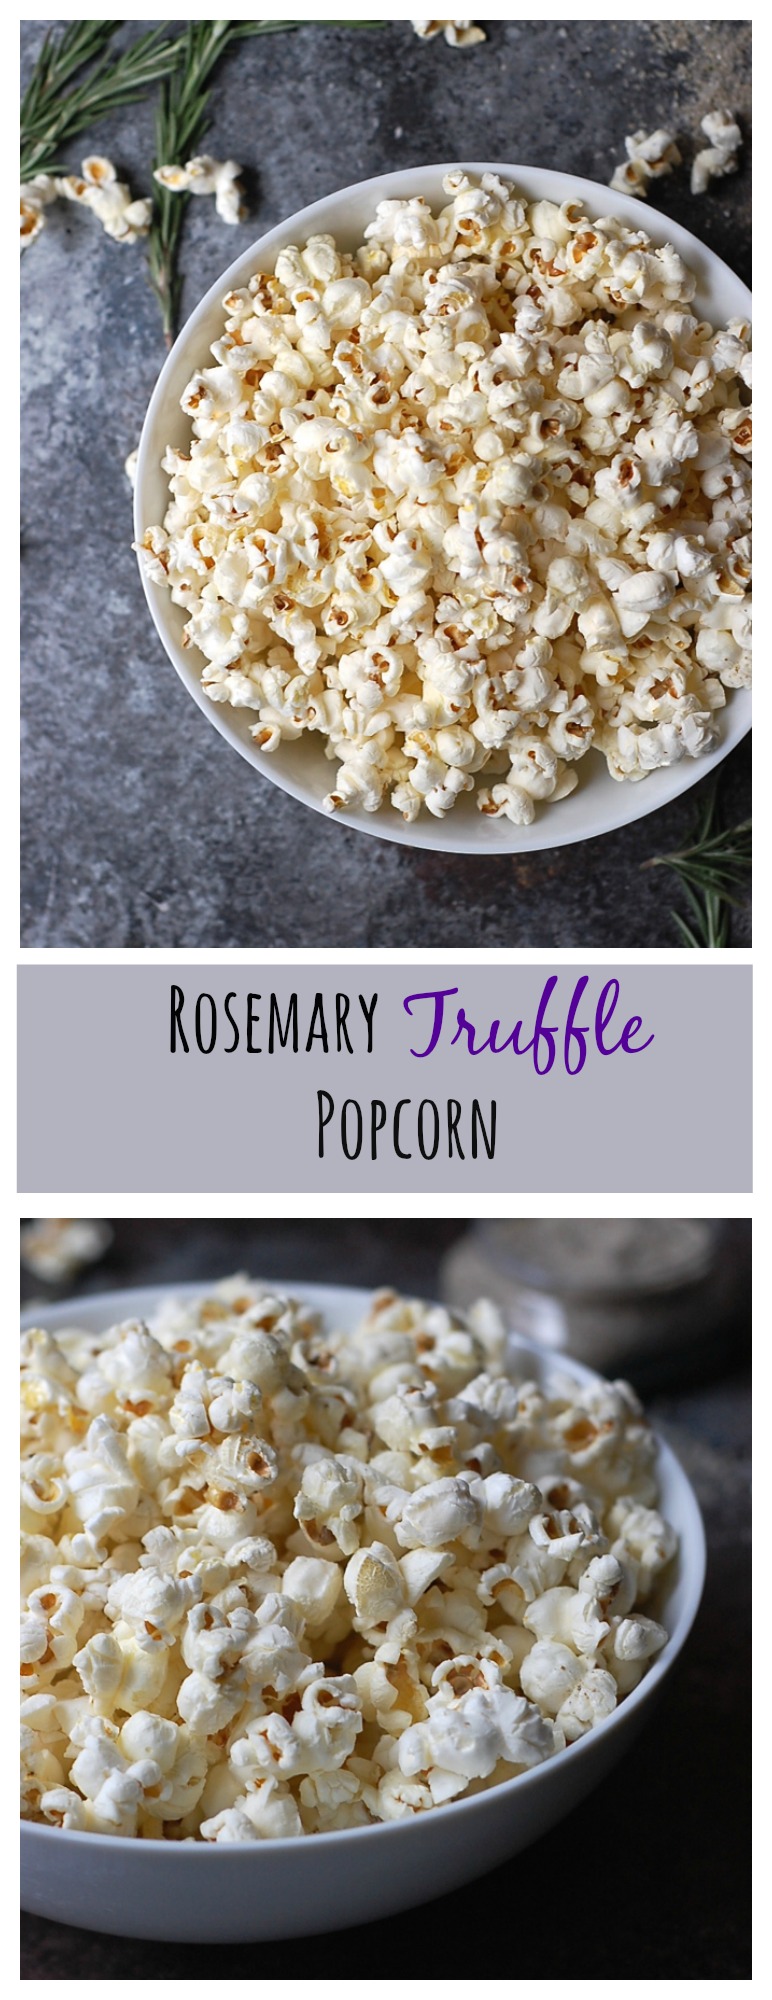 This gluten-free, vegan popcorn is salty, crunchy, truffly and oh so addictive!